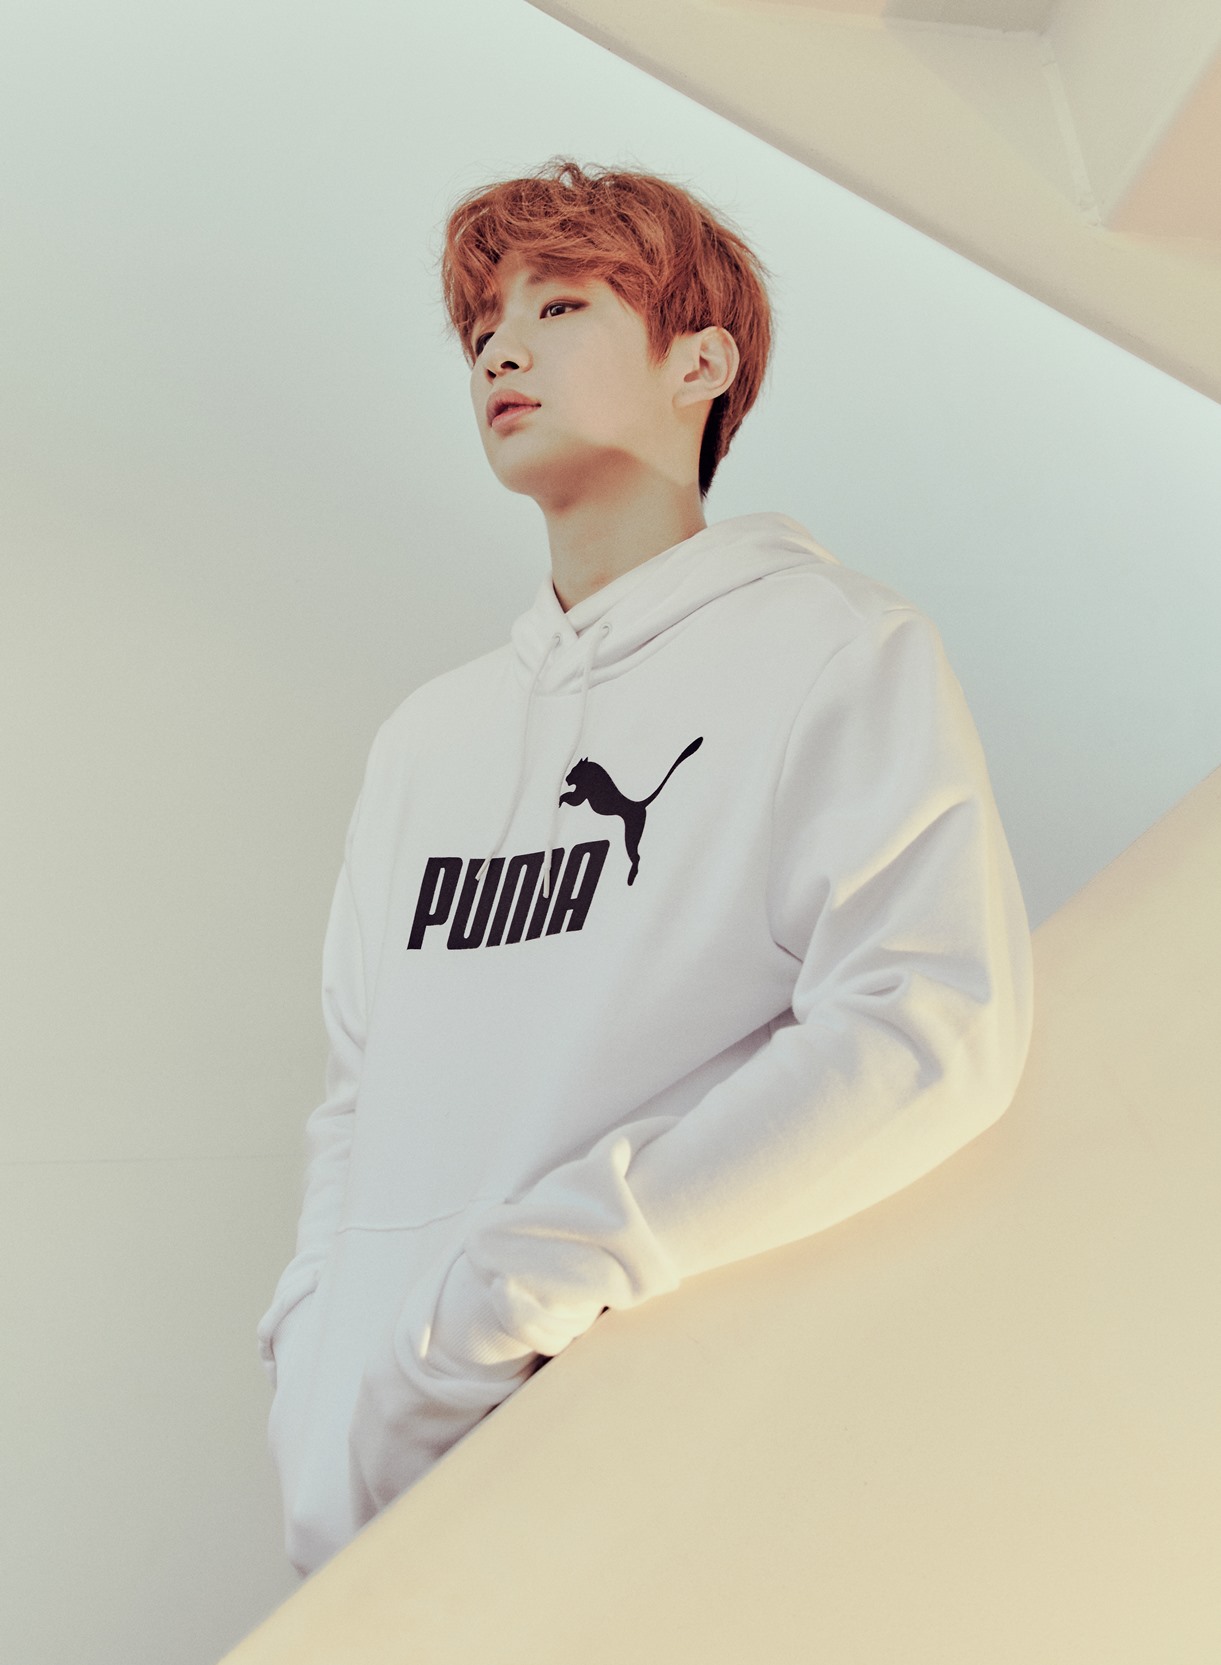 Kang Daniel and global sports brand Puma (PUMA) will showcase Collaboration products.Puma will sell its first collaboration shoe RS-XCube with Kang Daniel from 17th, and can be purchased at Puma Online Store and All States stores.RS-XCube is one of Pumas flagship shoe line, the RS (Running System) series, featuring an excellent grip. It is wearable for both sexes.The overall ivory color has a blue and pink color block at the point, creating a cheerful atmosphere.The RS-XCube campaign message is also impressive: You and I have a special relationship as a key message, meaning a sticky and special bond between Kang Daniel and the fan.We have a special event. Puma offers Fan signing event entry and undisclosed photo card.It also runs the Kang Daniel Cube Room for customers visiting the store.The Kang Daniel Cube Room offers private special footage and the worlds only one Goods, as well as virtual video calls with Kang Daniel.The Cube Room is open to anyone during the period at Puma Apgujeong branch (January 17-January 29) or Busan Sports Liberation branch (February 1-February 14).When purchasing RS-X Cube products at All States stores, you can get special prizes and limited goods through on-site event after bringing the Fan signing event application ticket in the shoe box.In addition, the Fan signing event will be held from January 17 to February 28 for the purchaser of the product.